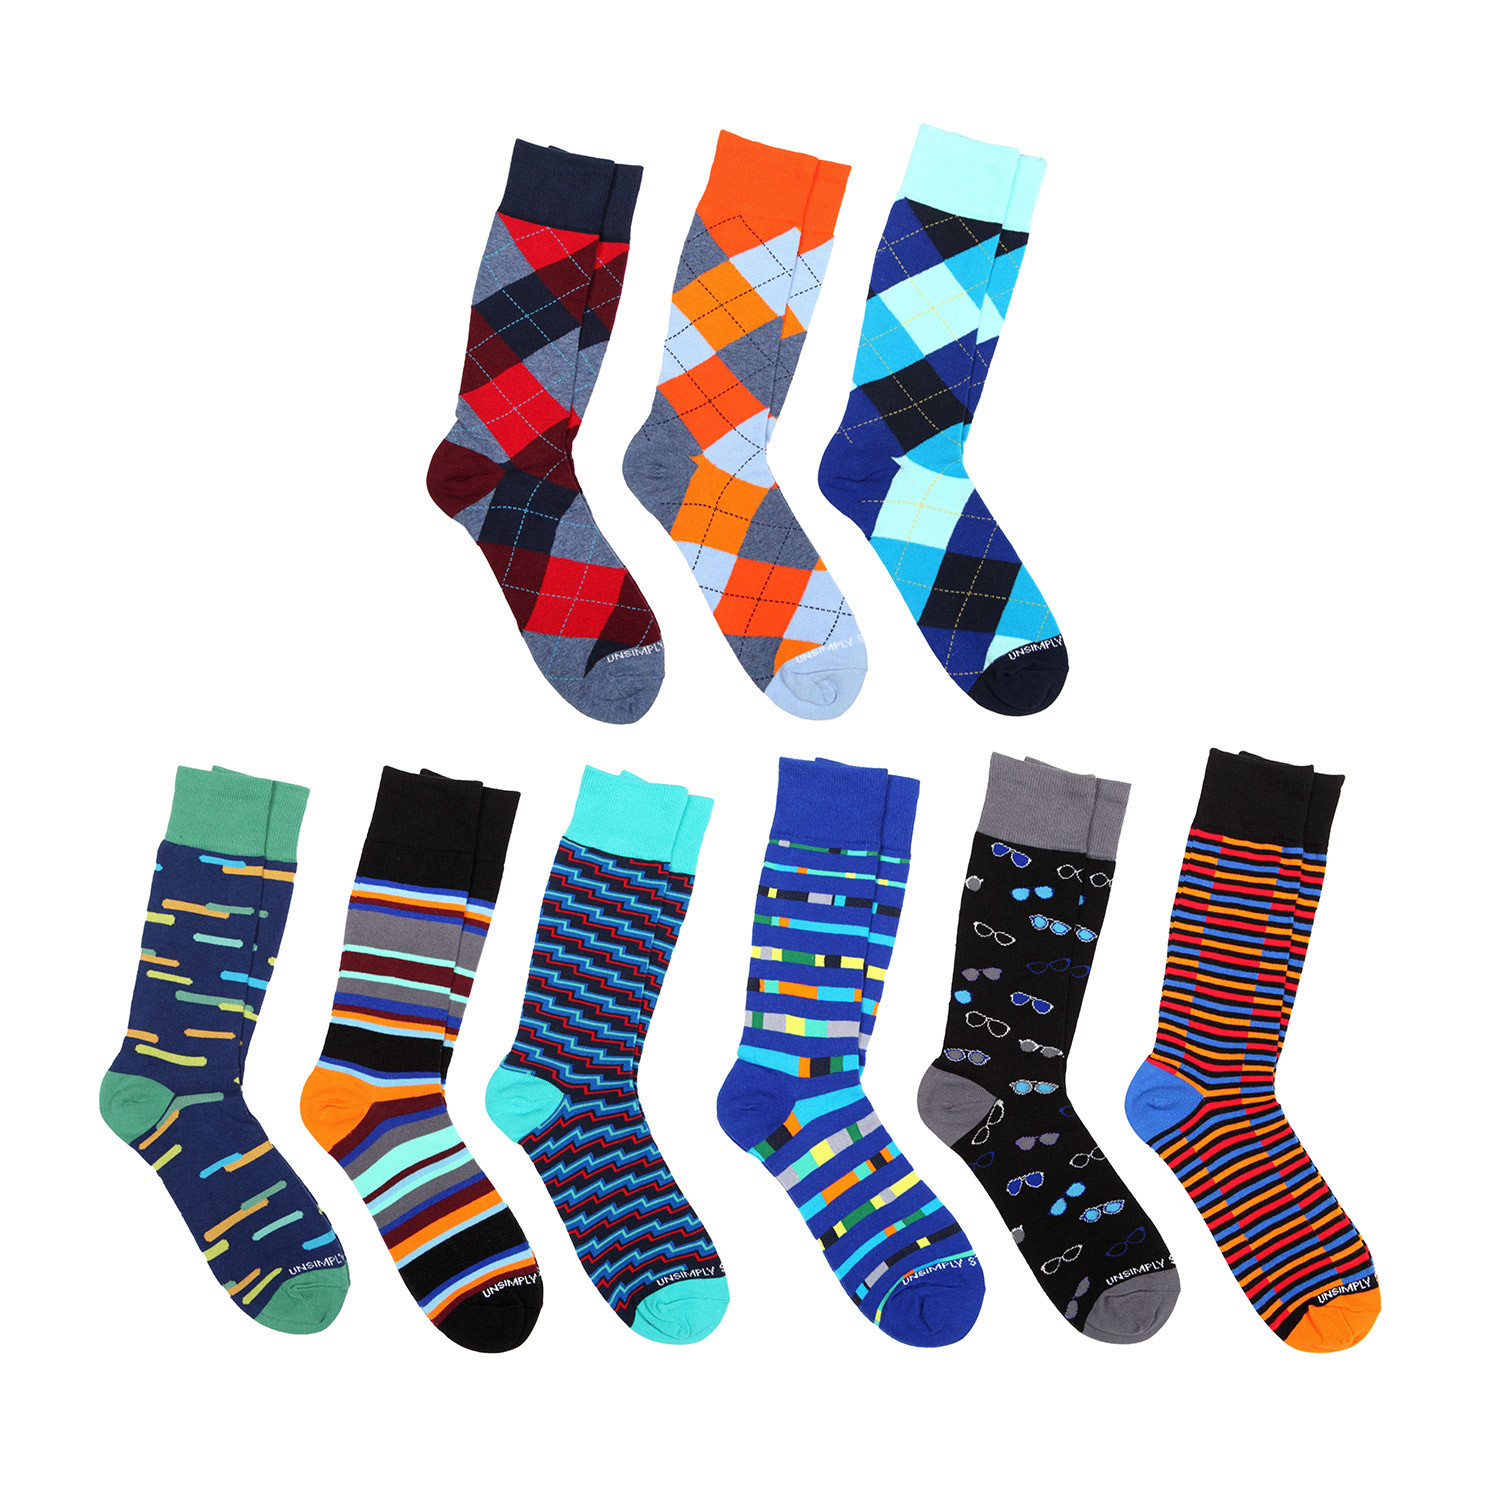 Crew Socks Combo Set // 1019 // 9 Pack - Unsimply Stitched - Touch of ...